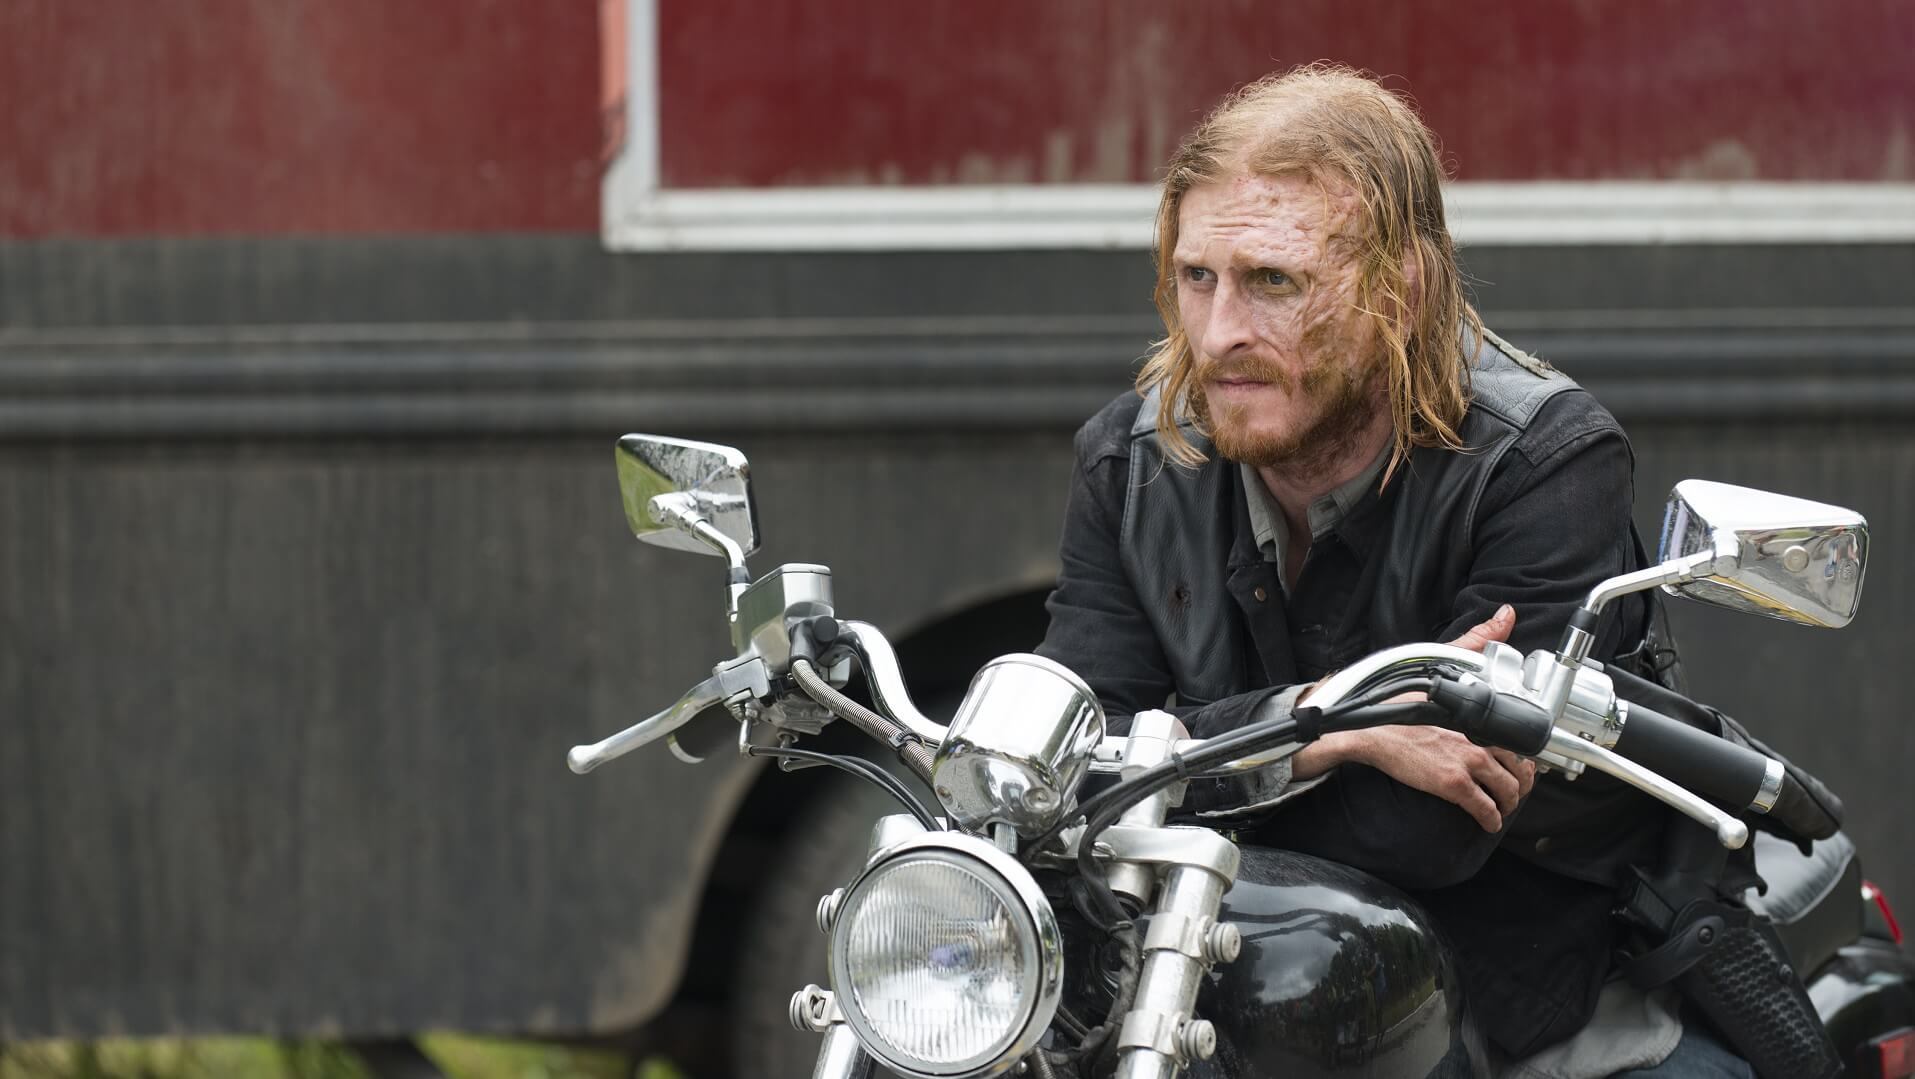 Dwight sitting on Daryl's motorcycle on The Walking Dead